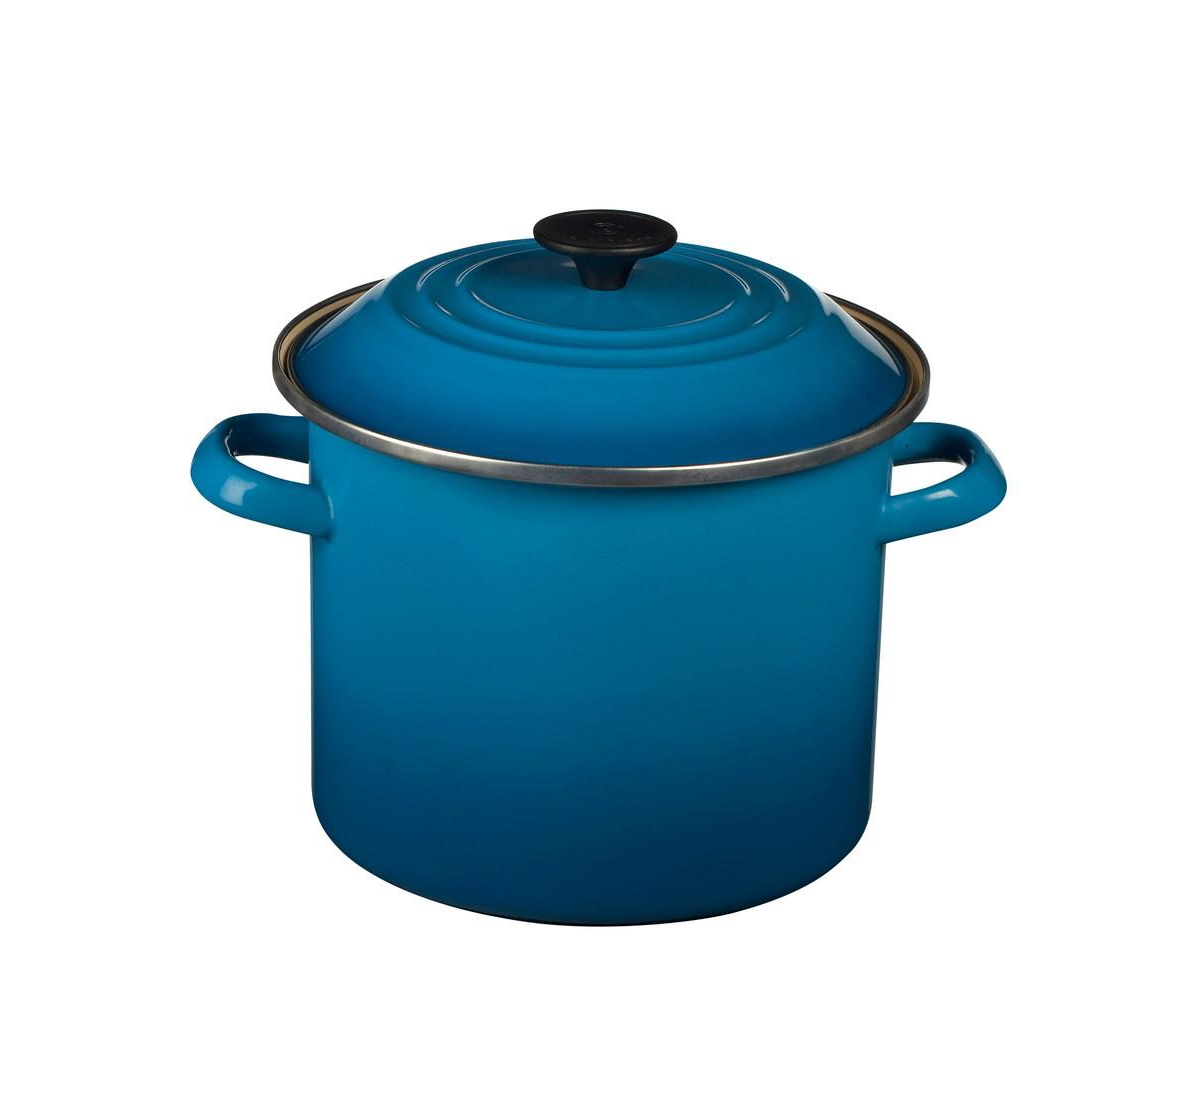 Le Creuset 6 Quart Enamel On Steel Stockpot With Lid In Marseille